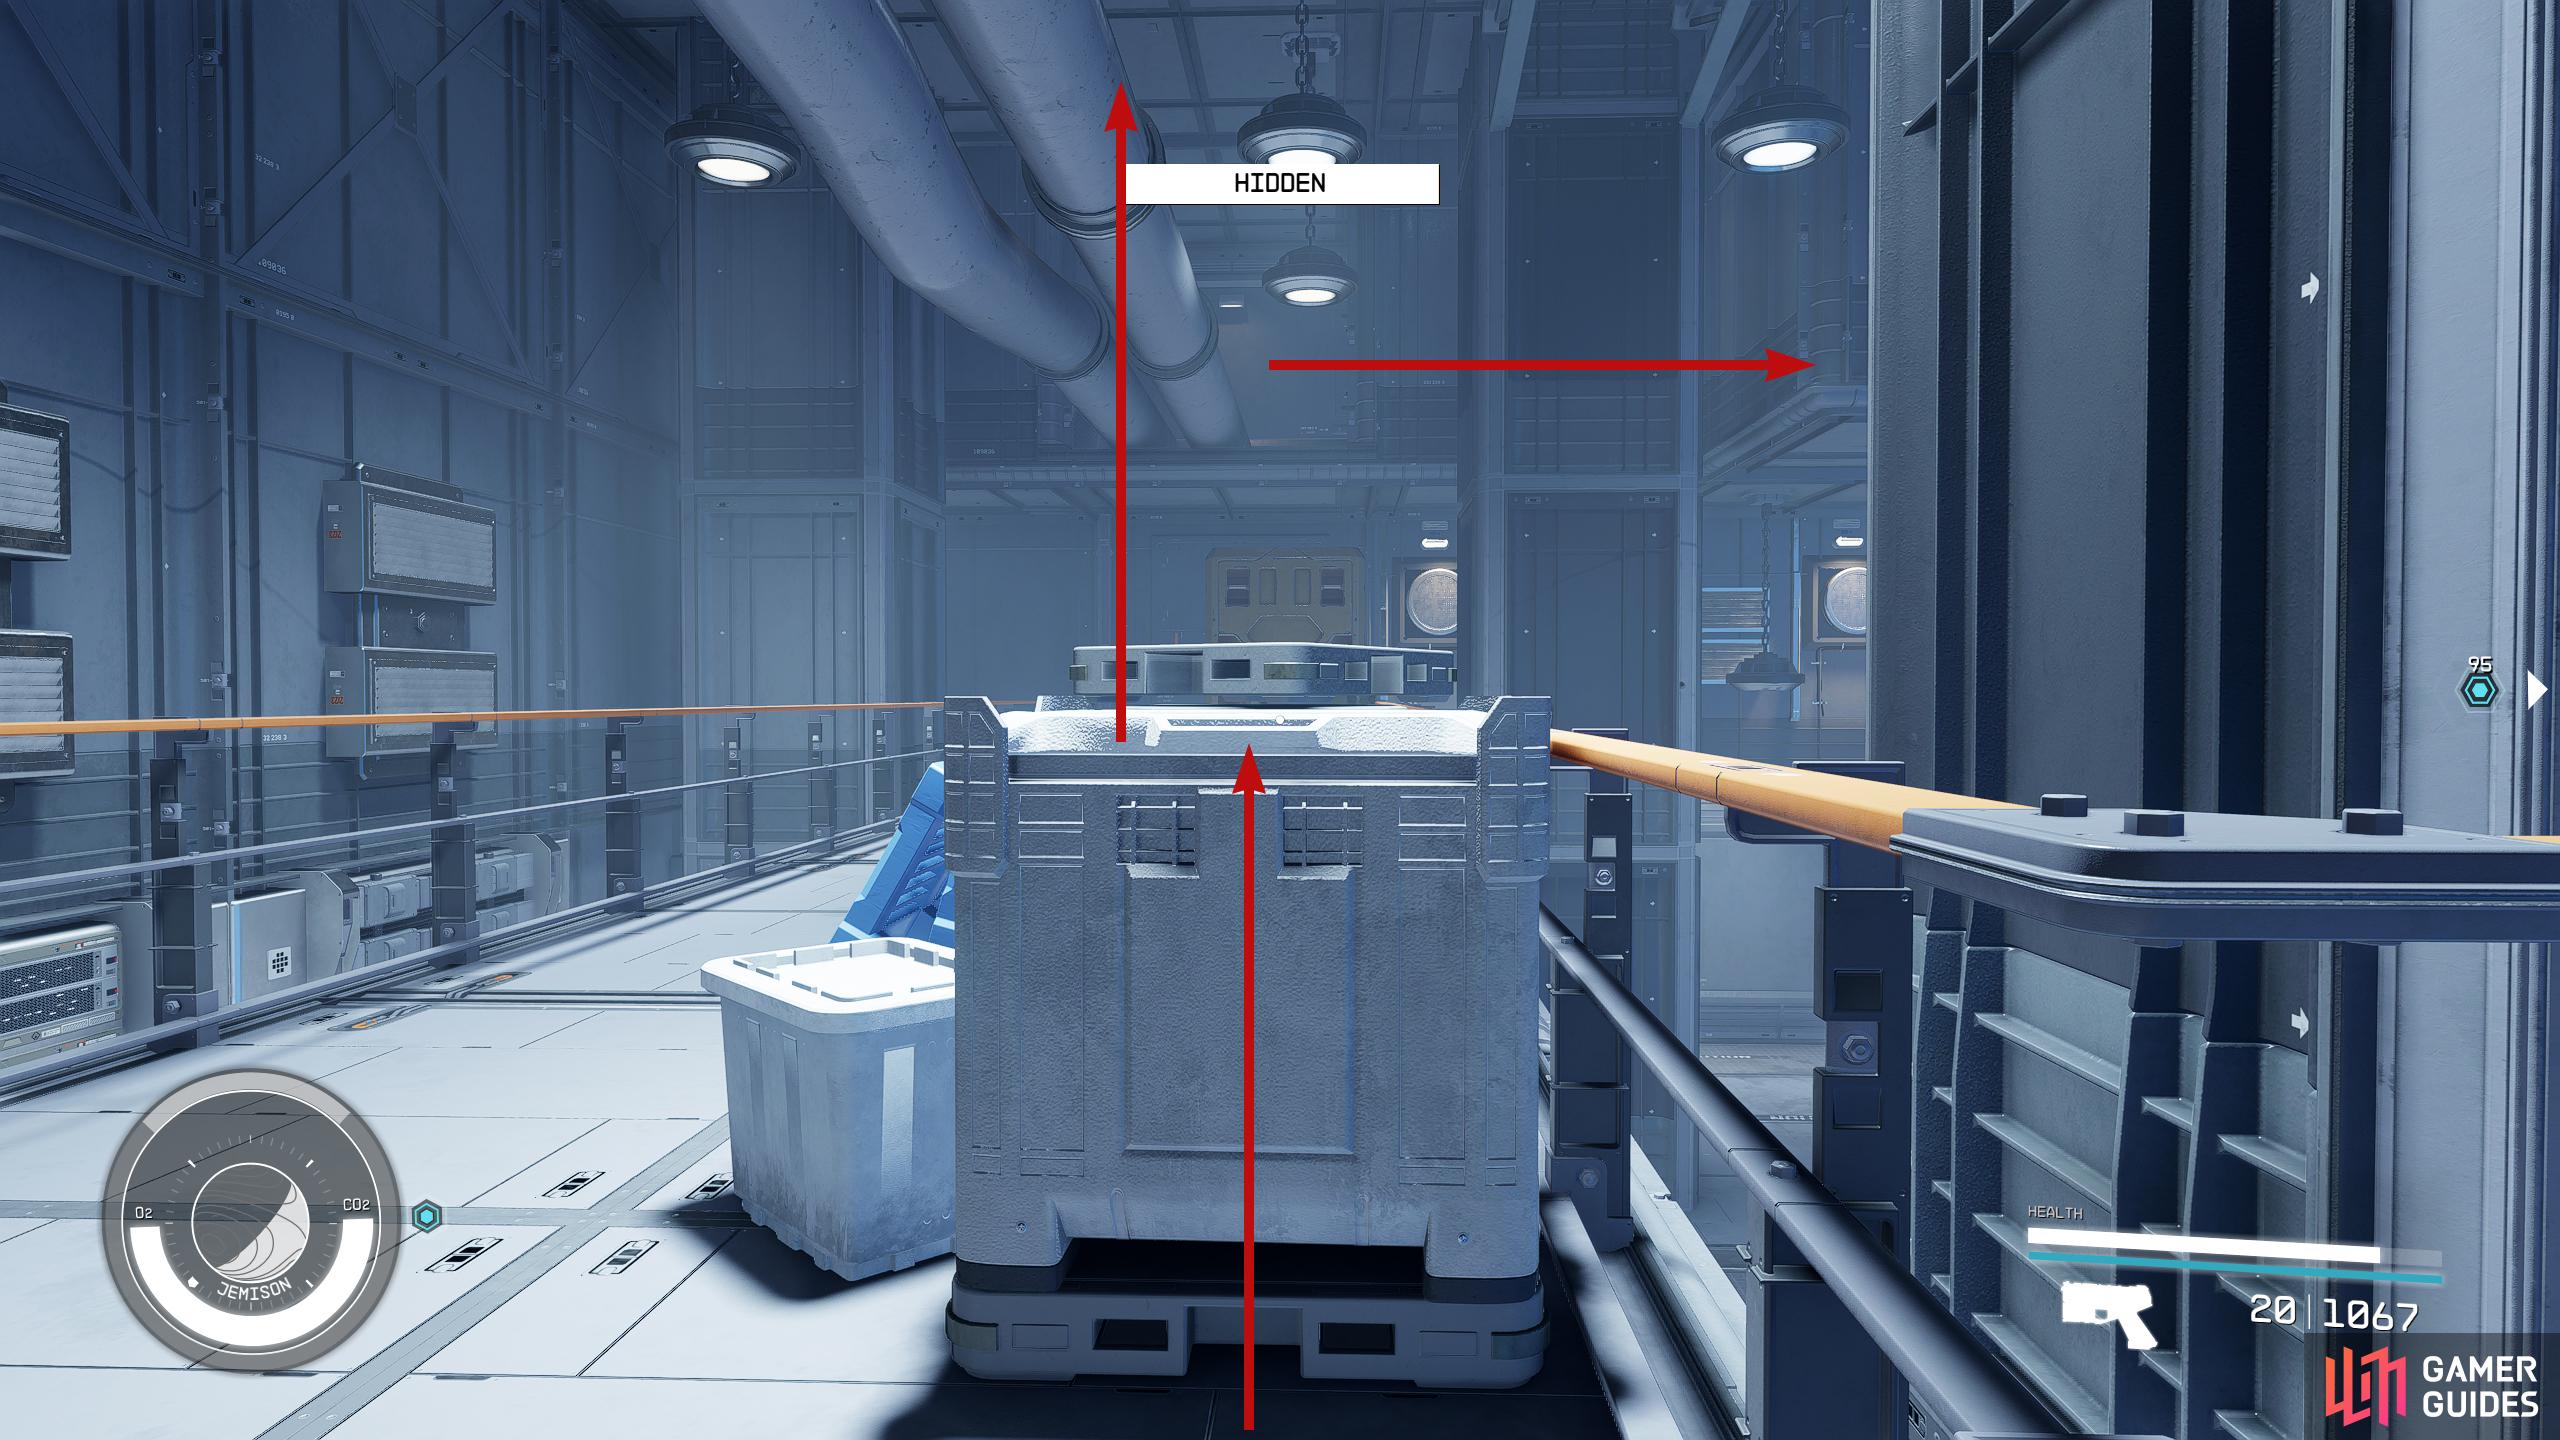 Head back up to the walkway where the turret computer was and go the opposite direction until you reach a crate. Jump on the crate onto the pipes above.